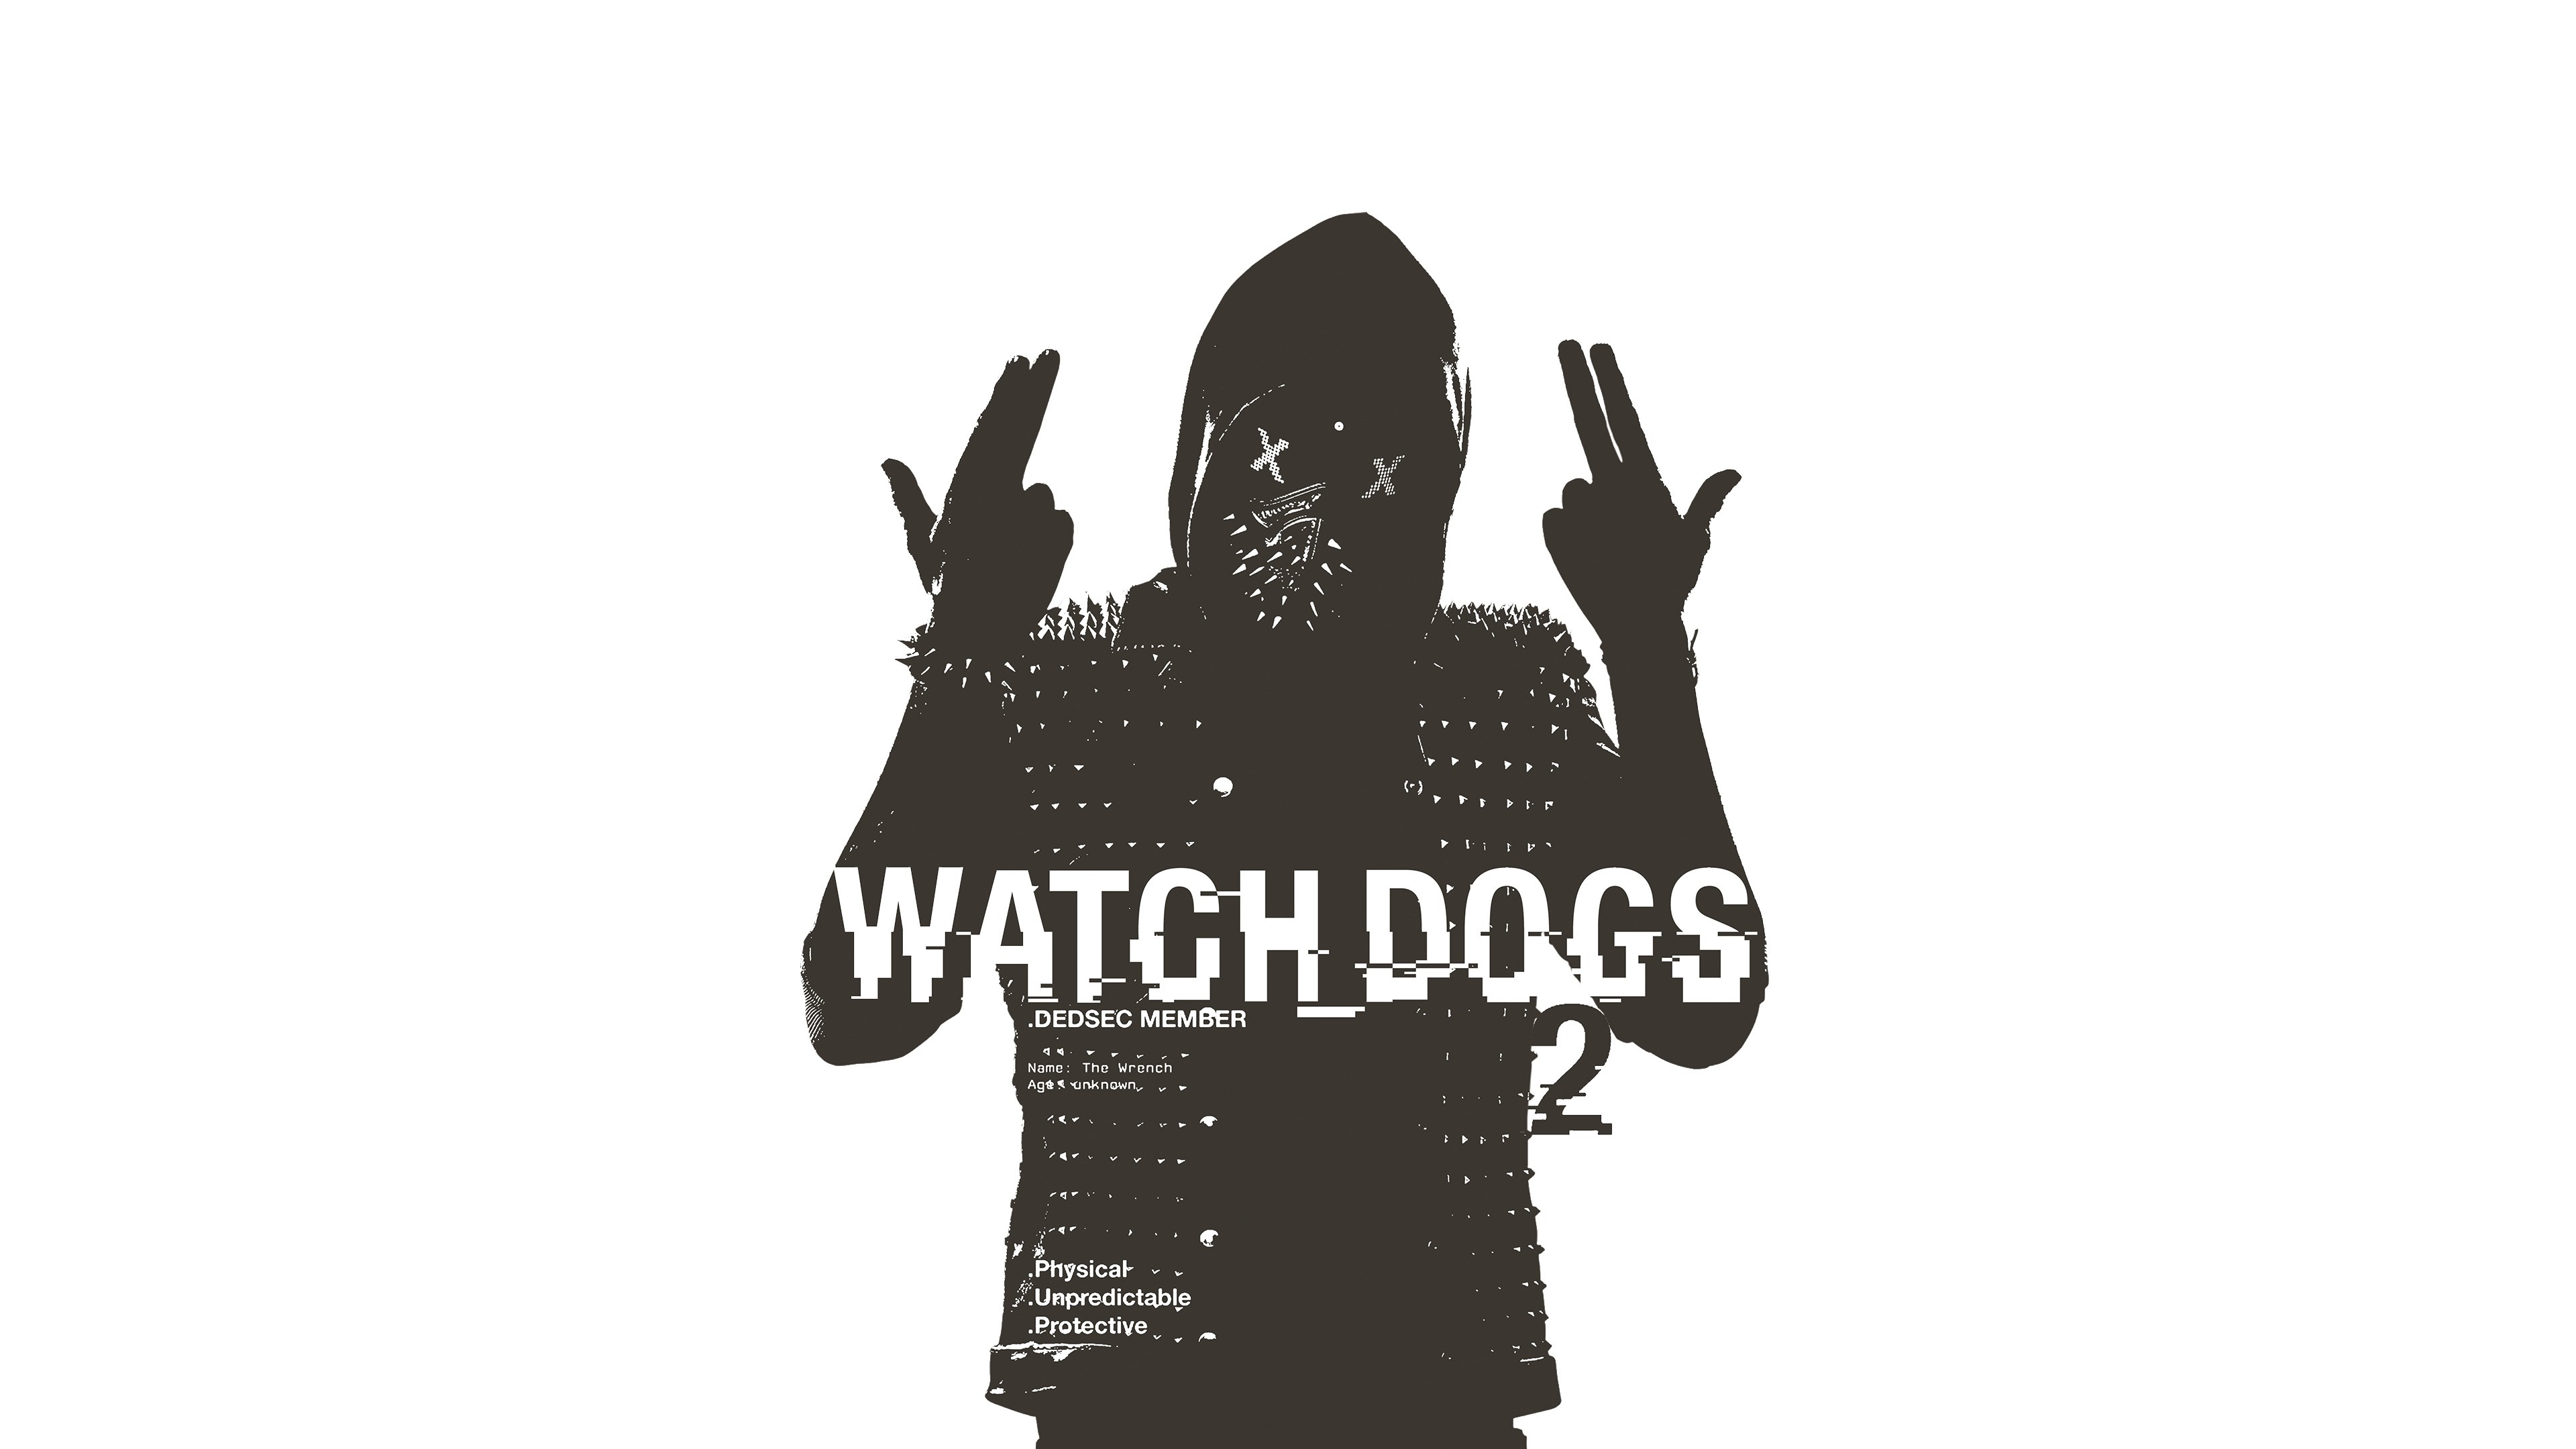 Watch Dogs Ubisoft Watch Dogs 2 DEDSEC Wrench Video Game Art 3840x2160